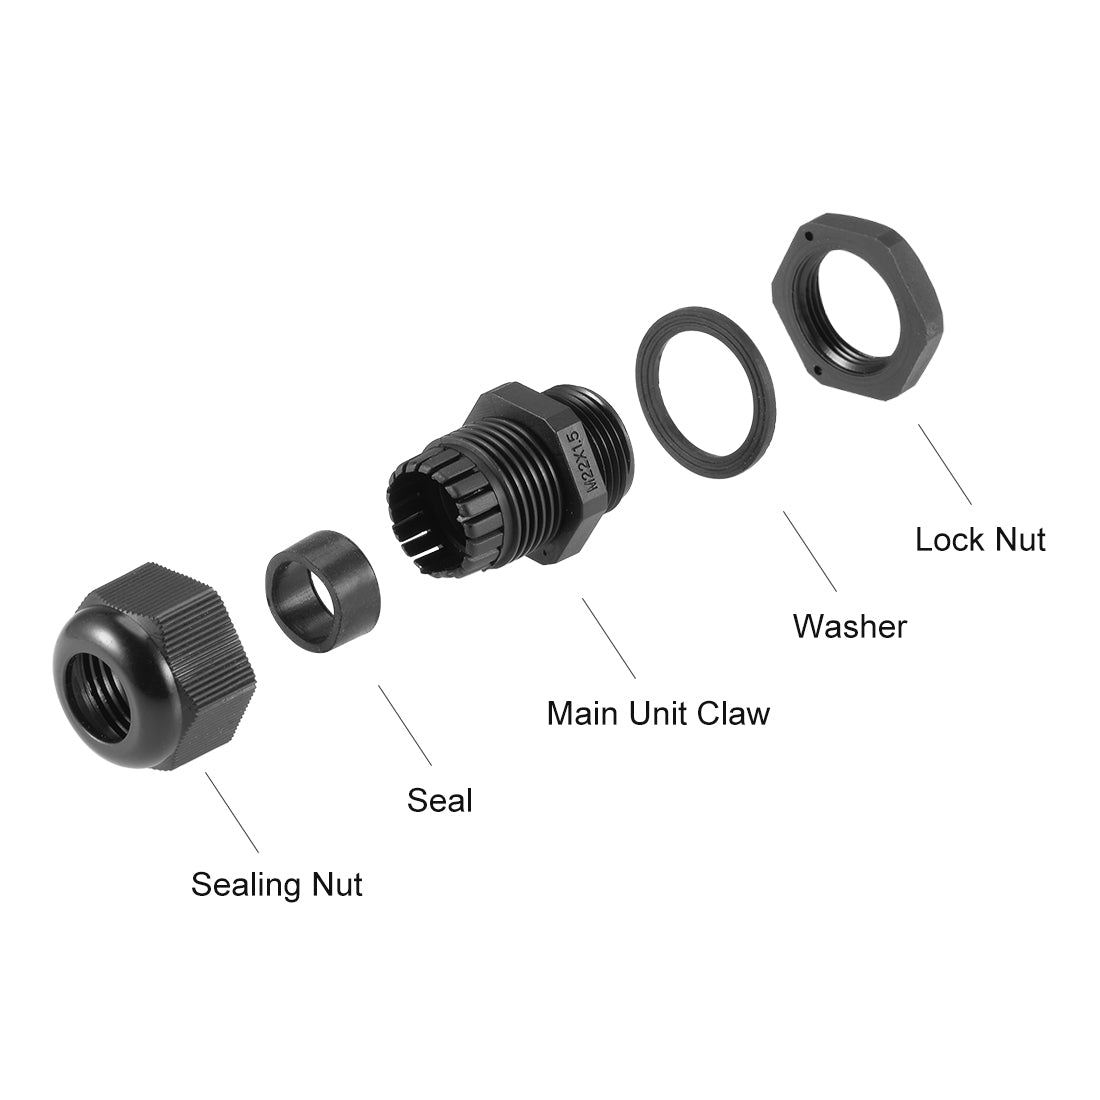 uxcell Uxcell M22x1.5 Cable Gland 7mm-12mm Wire Hole Waterproof Nylon Joint Adjustable Locknut with Washer Black 20pcs